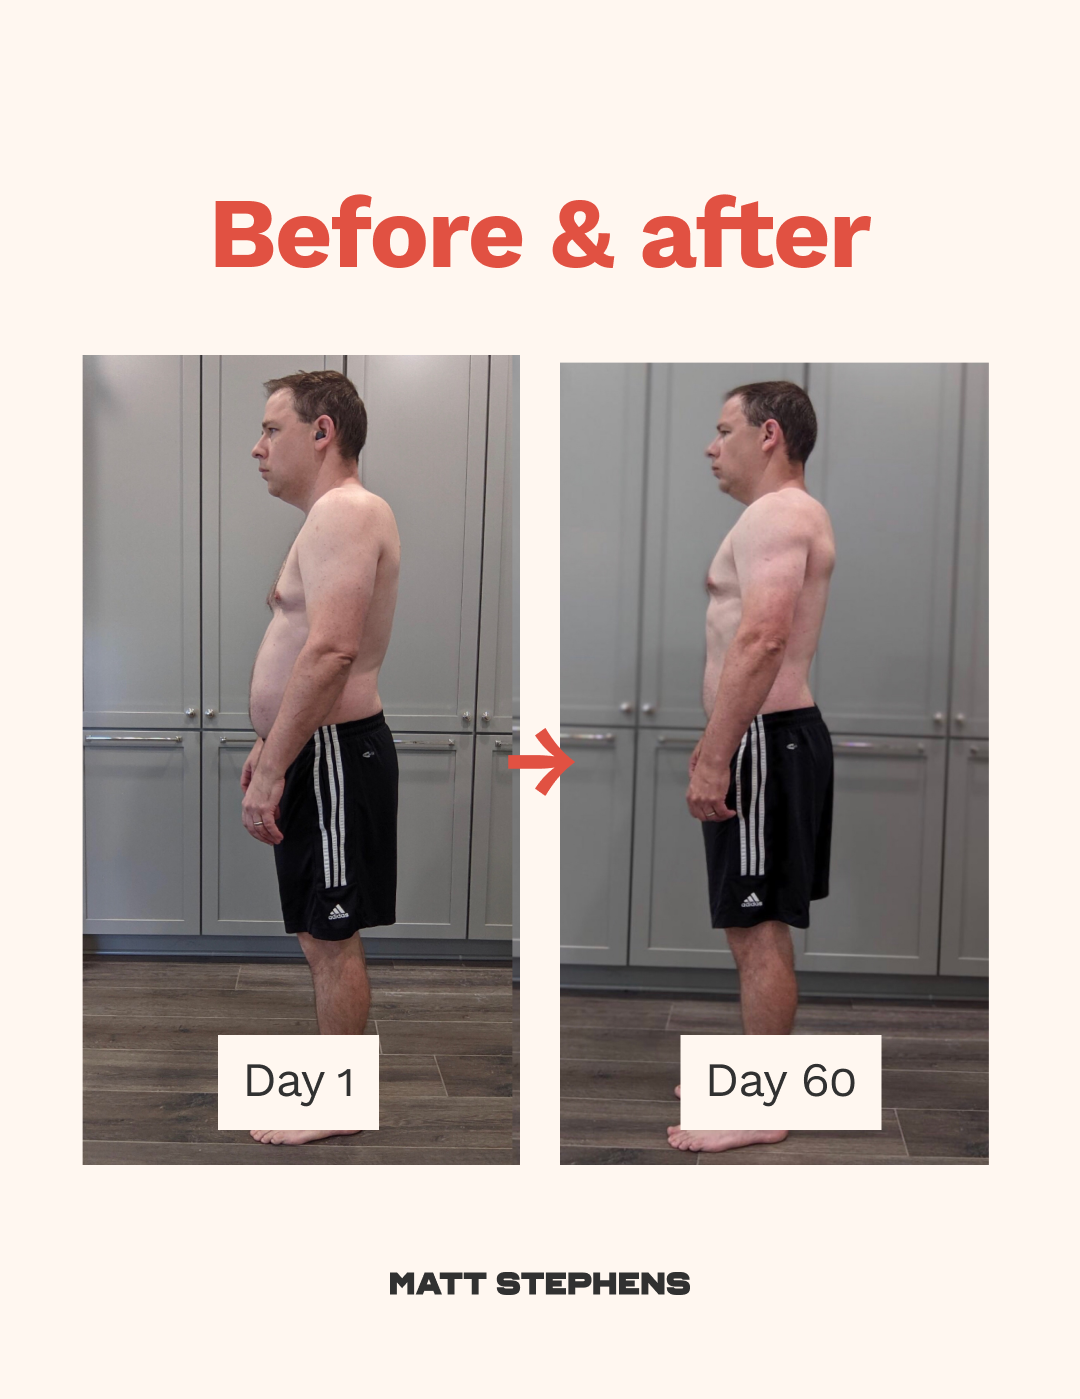 Brandon, 39, Tech engineer, Lost a total of 10 lbs, but clearly gained muscle as well!